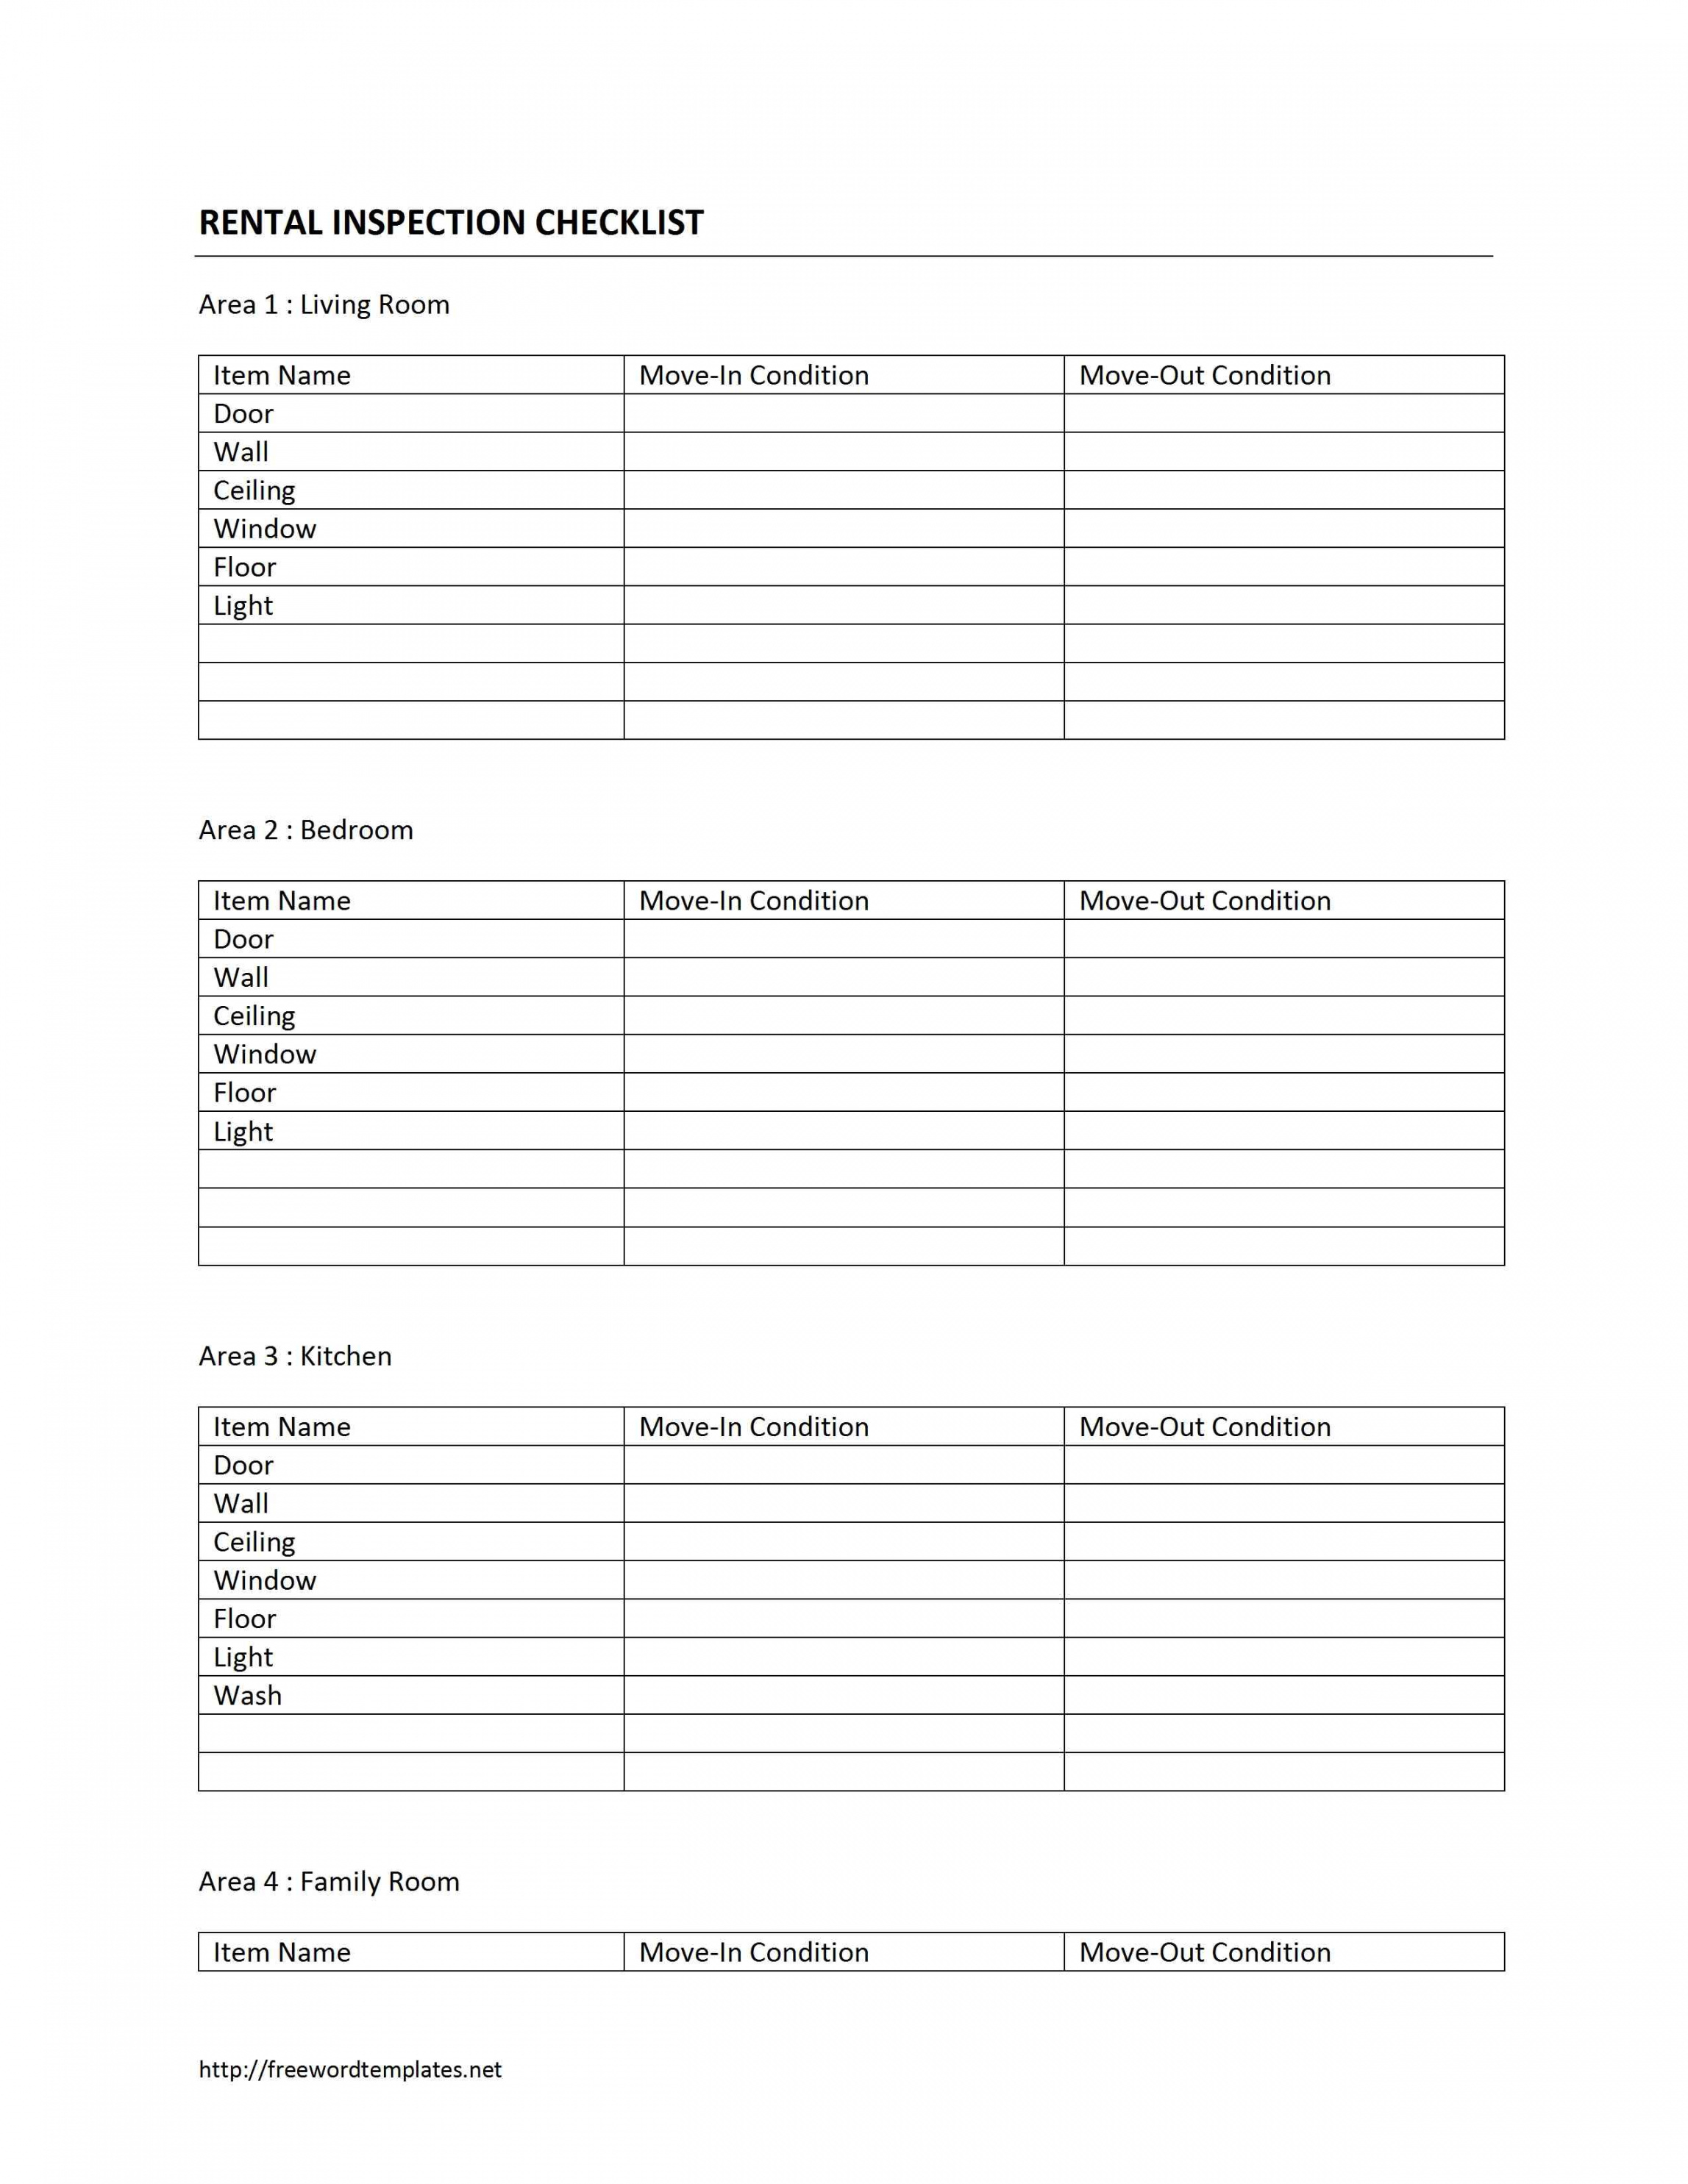 free home rental inspection checklist rental property checklist template examples